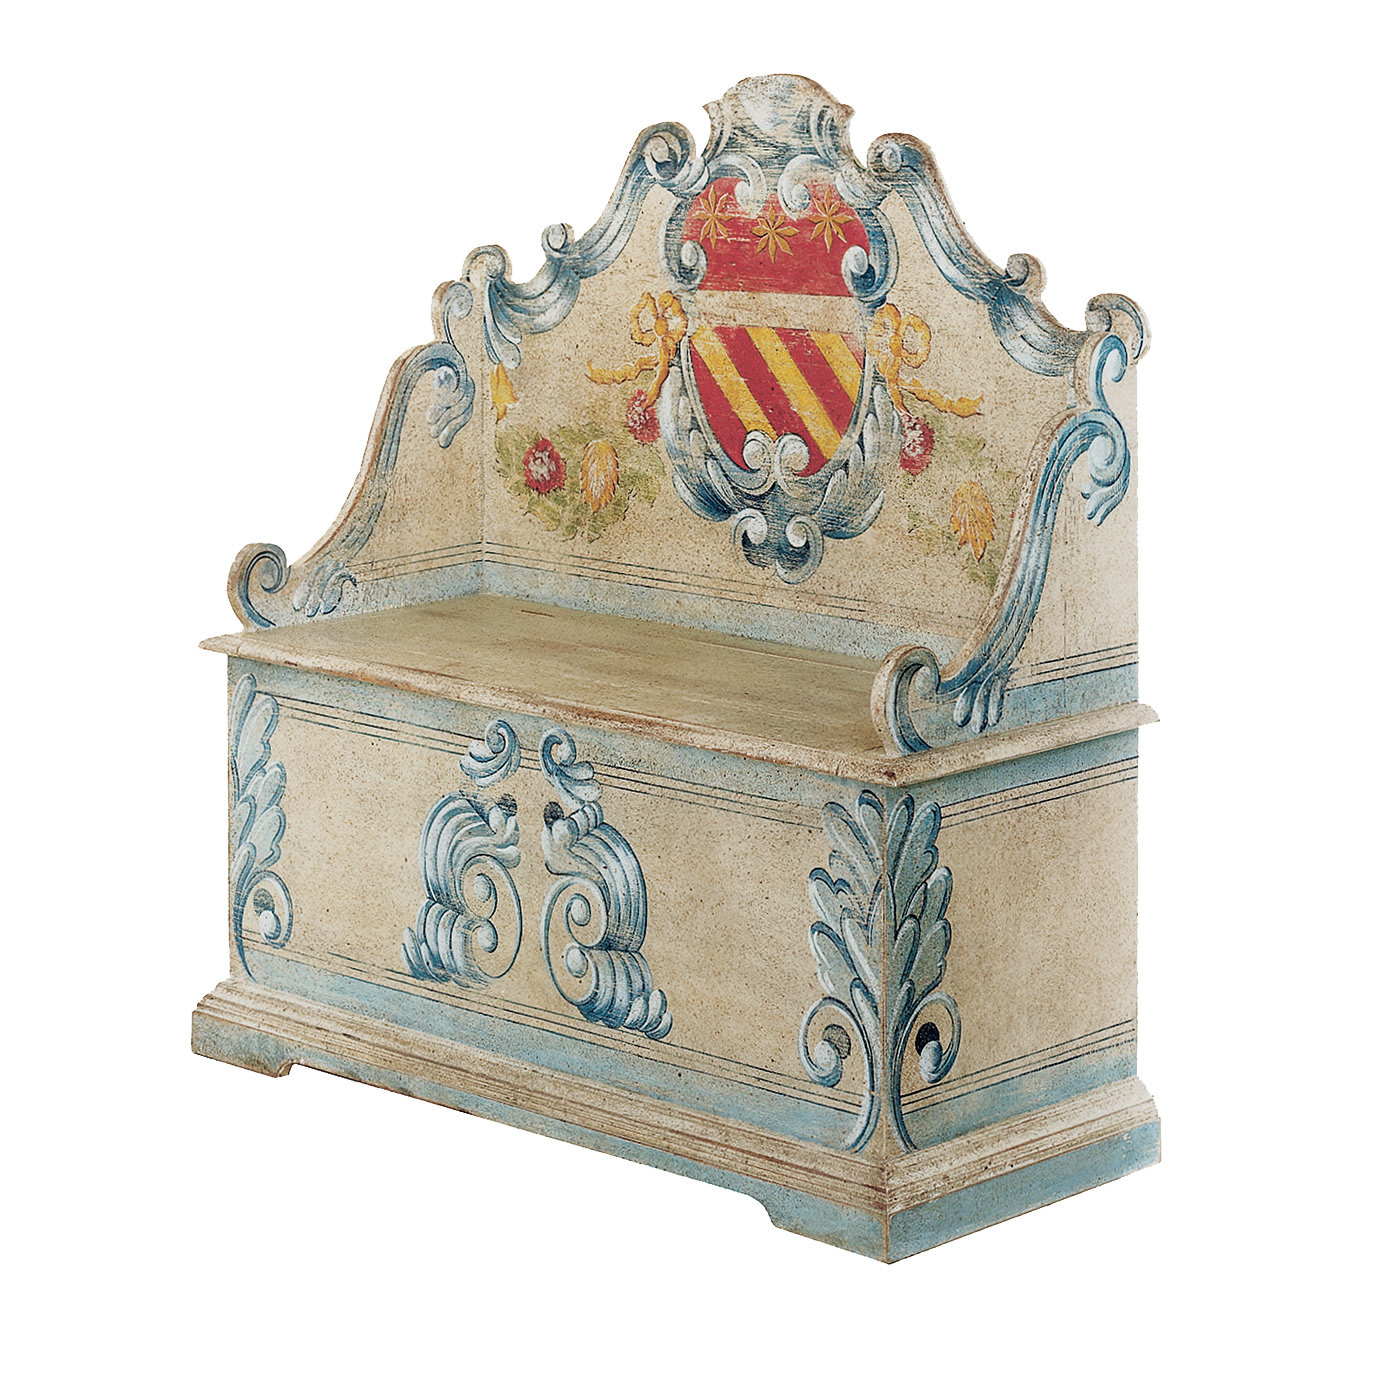 Blanket Chest with Crest Decoration - Bianchini & Capponi